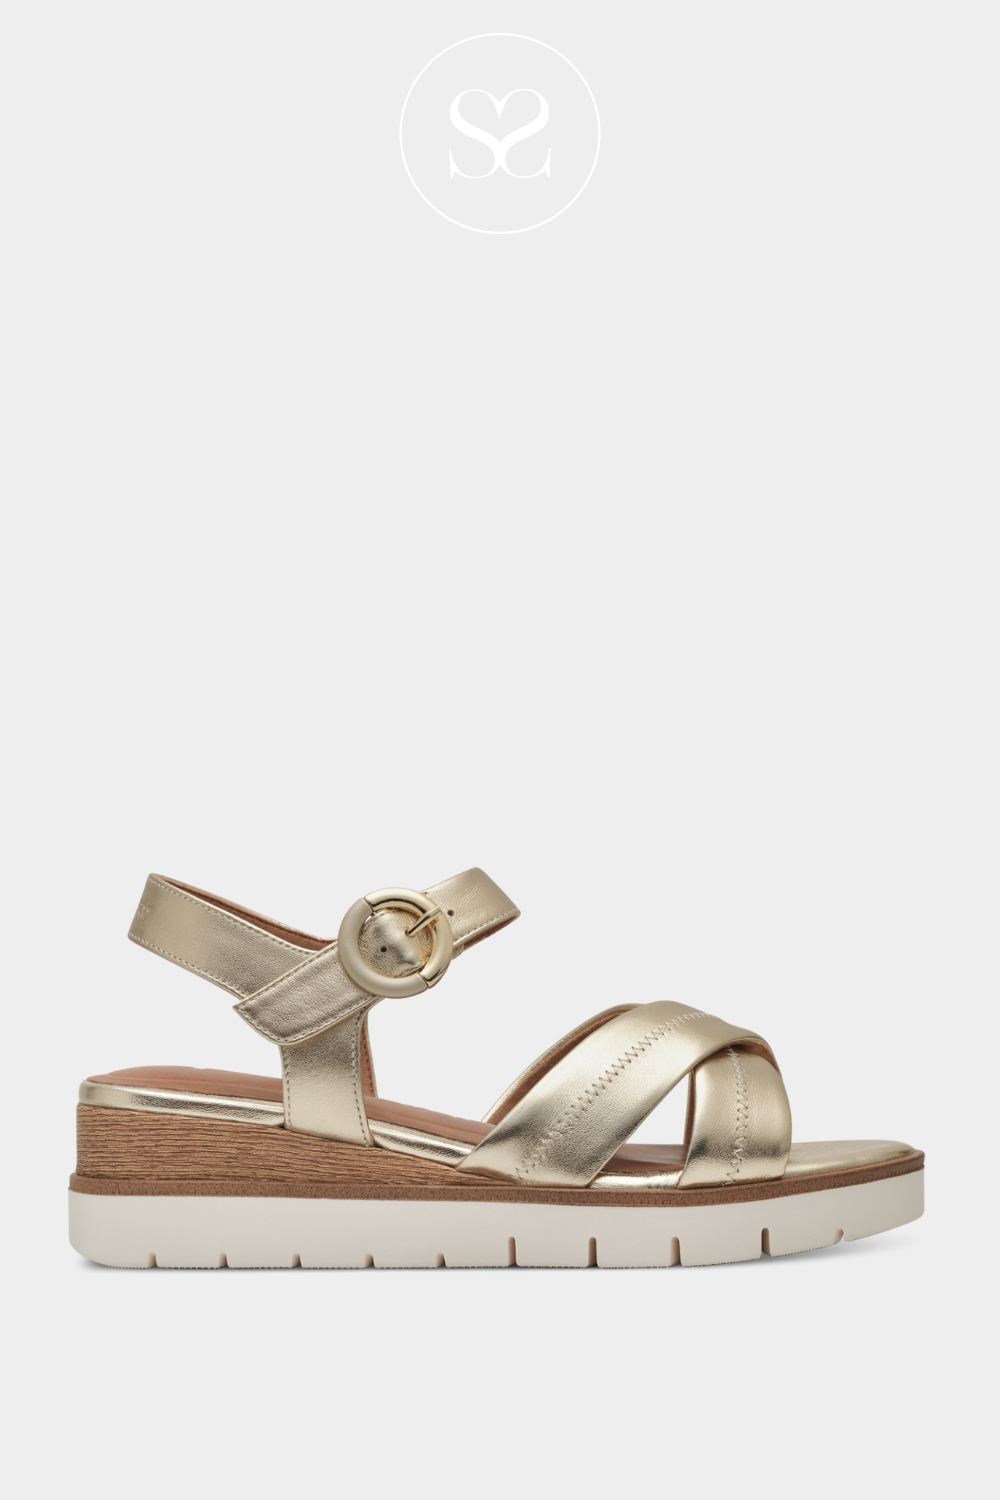 TAMARIS 1-28202-42 GOLD LEATHER WEDGE SANDALS WITH CRISS CROSS STRAPS AND ADJUSTABLE ANKLE STRAP